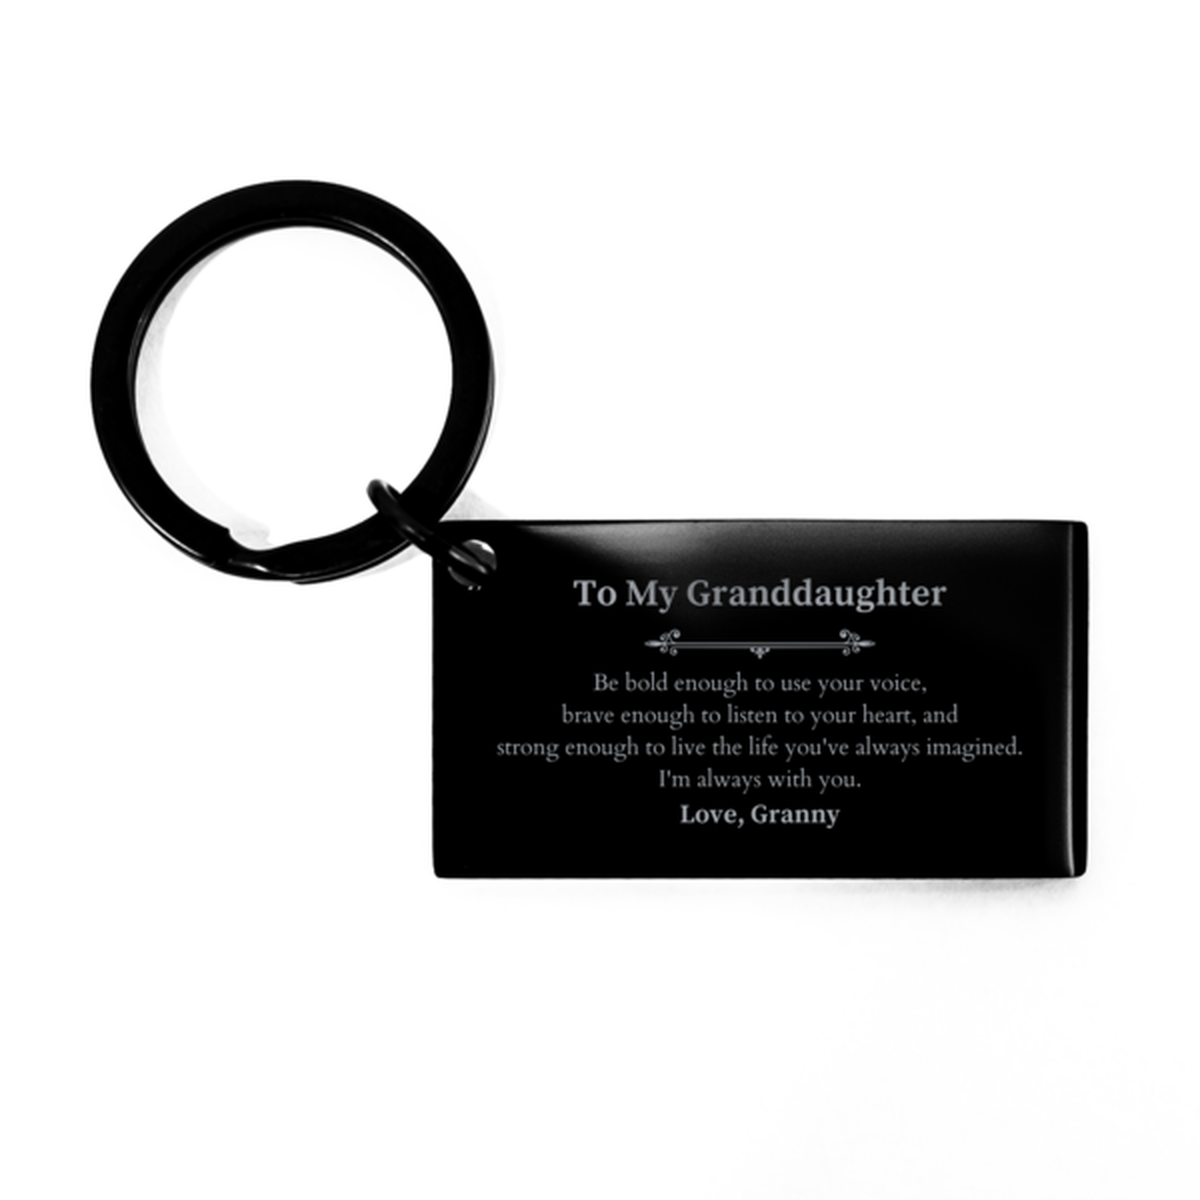 Keepsake Granddaughter Keychain Gift Idea Graduation Christmas Birthday Granddaughter from Granny, Granddaughter Be bold enough to use your voice, brave enough to listen to your heart. Love, Granny